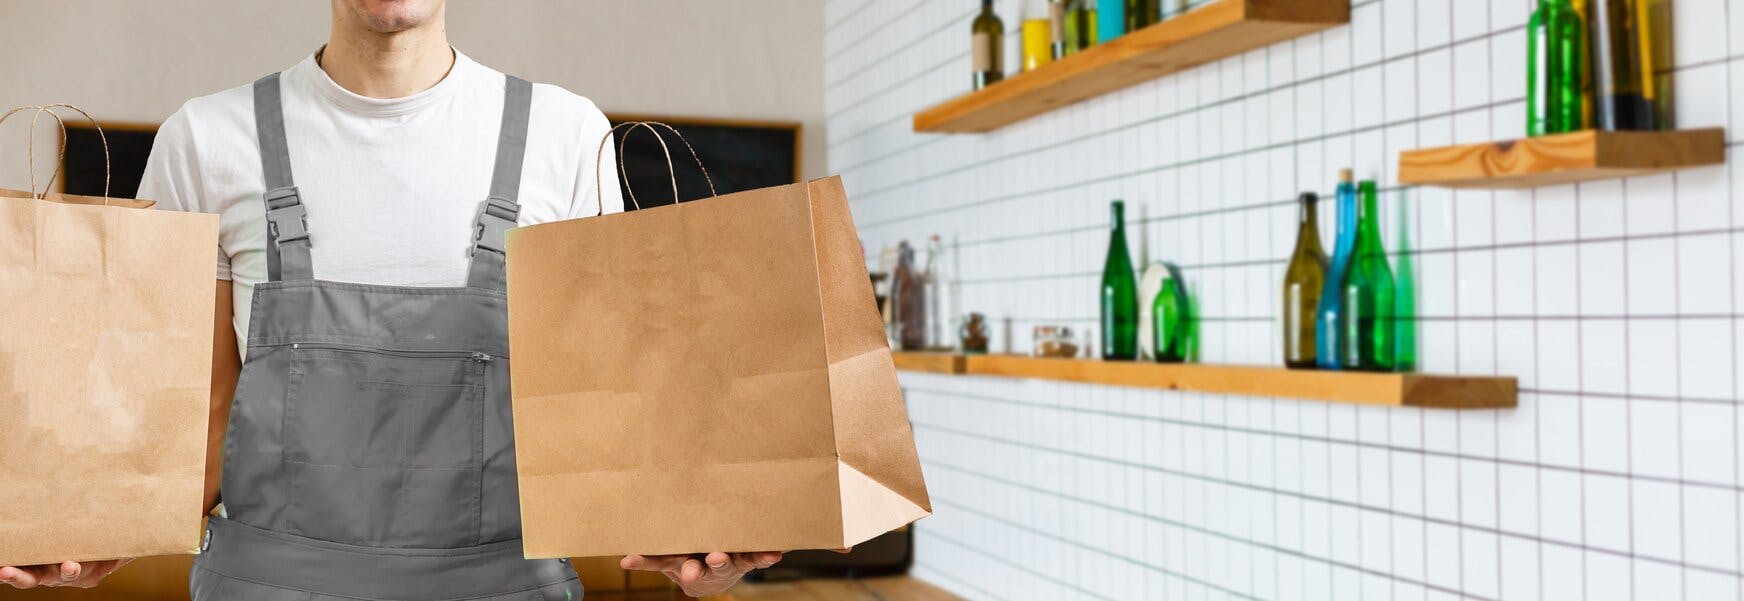 4 Successful Marketing Offers for Promoting Delivery & Takeout